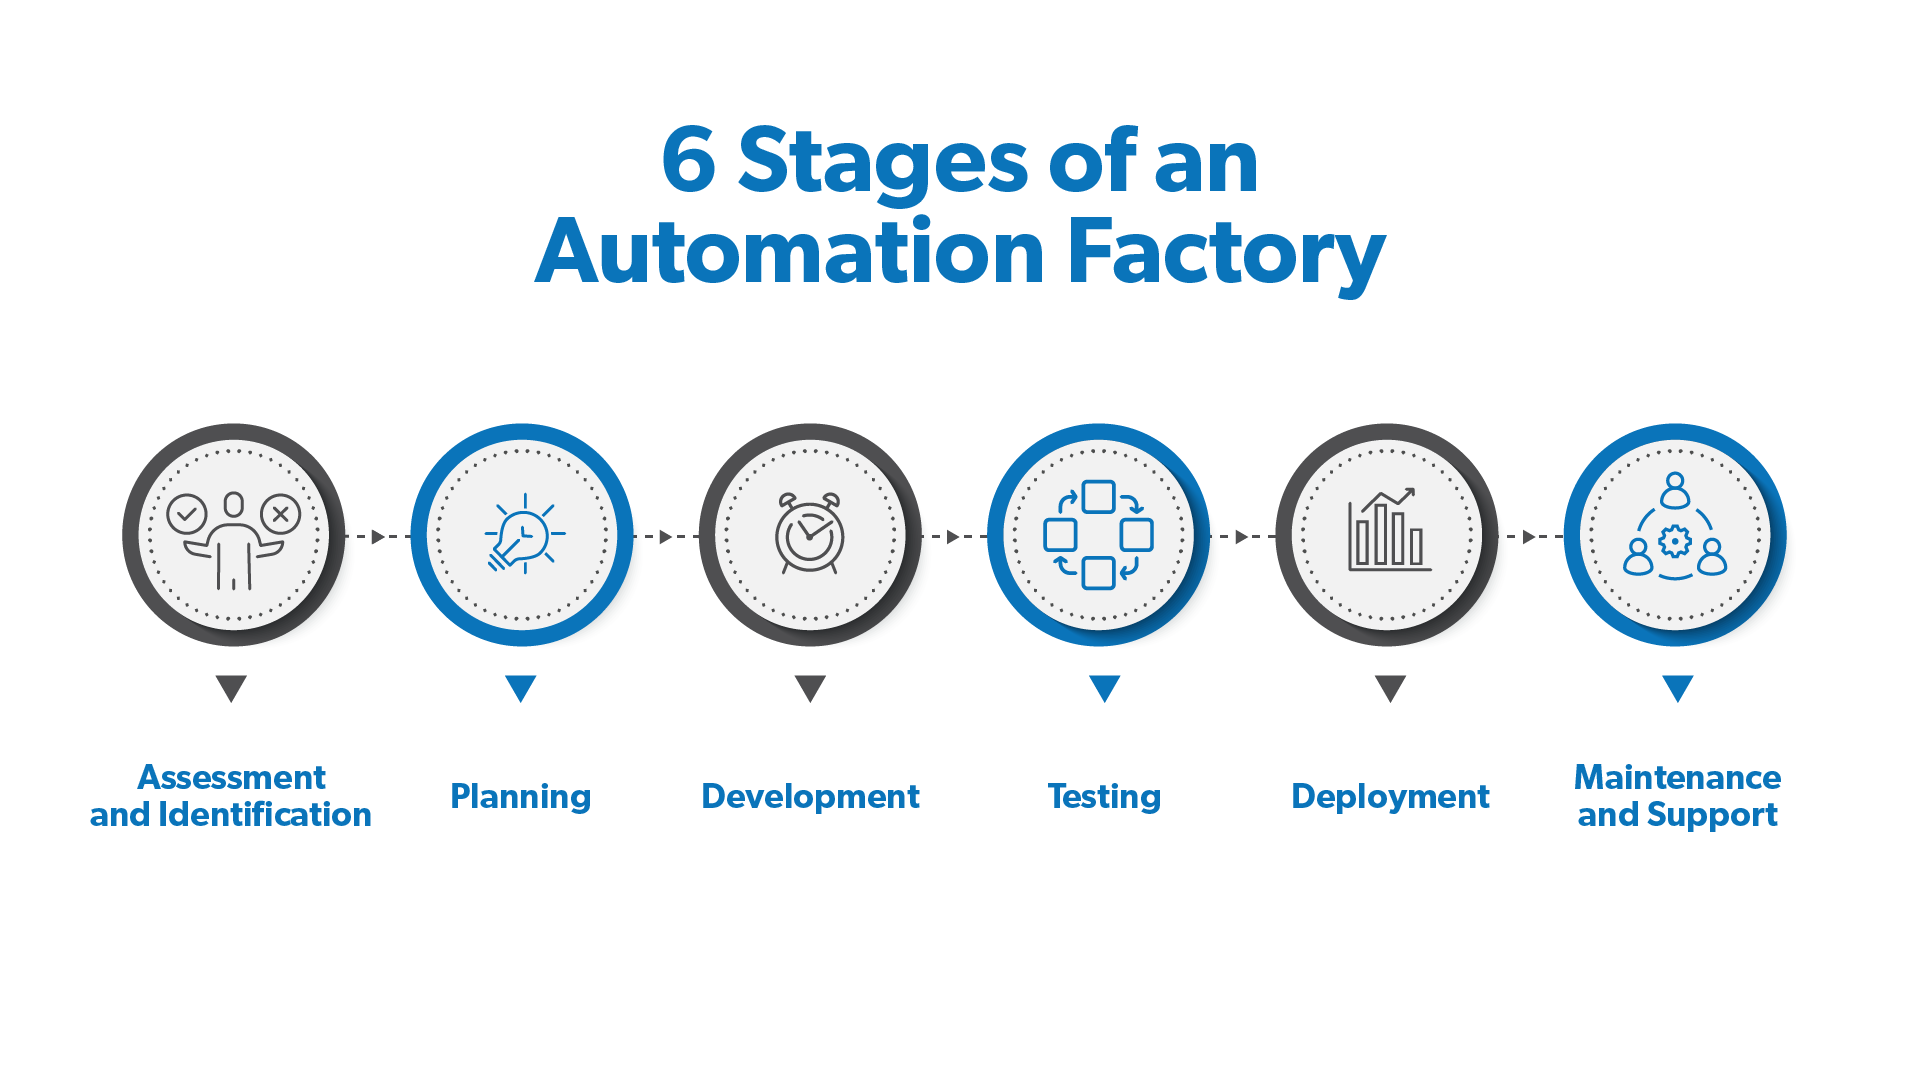 Stages of an Automation Factory - Genzeon model